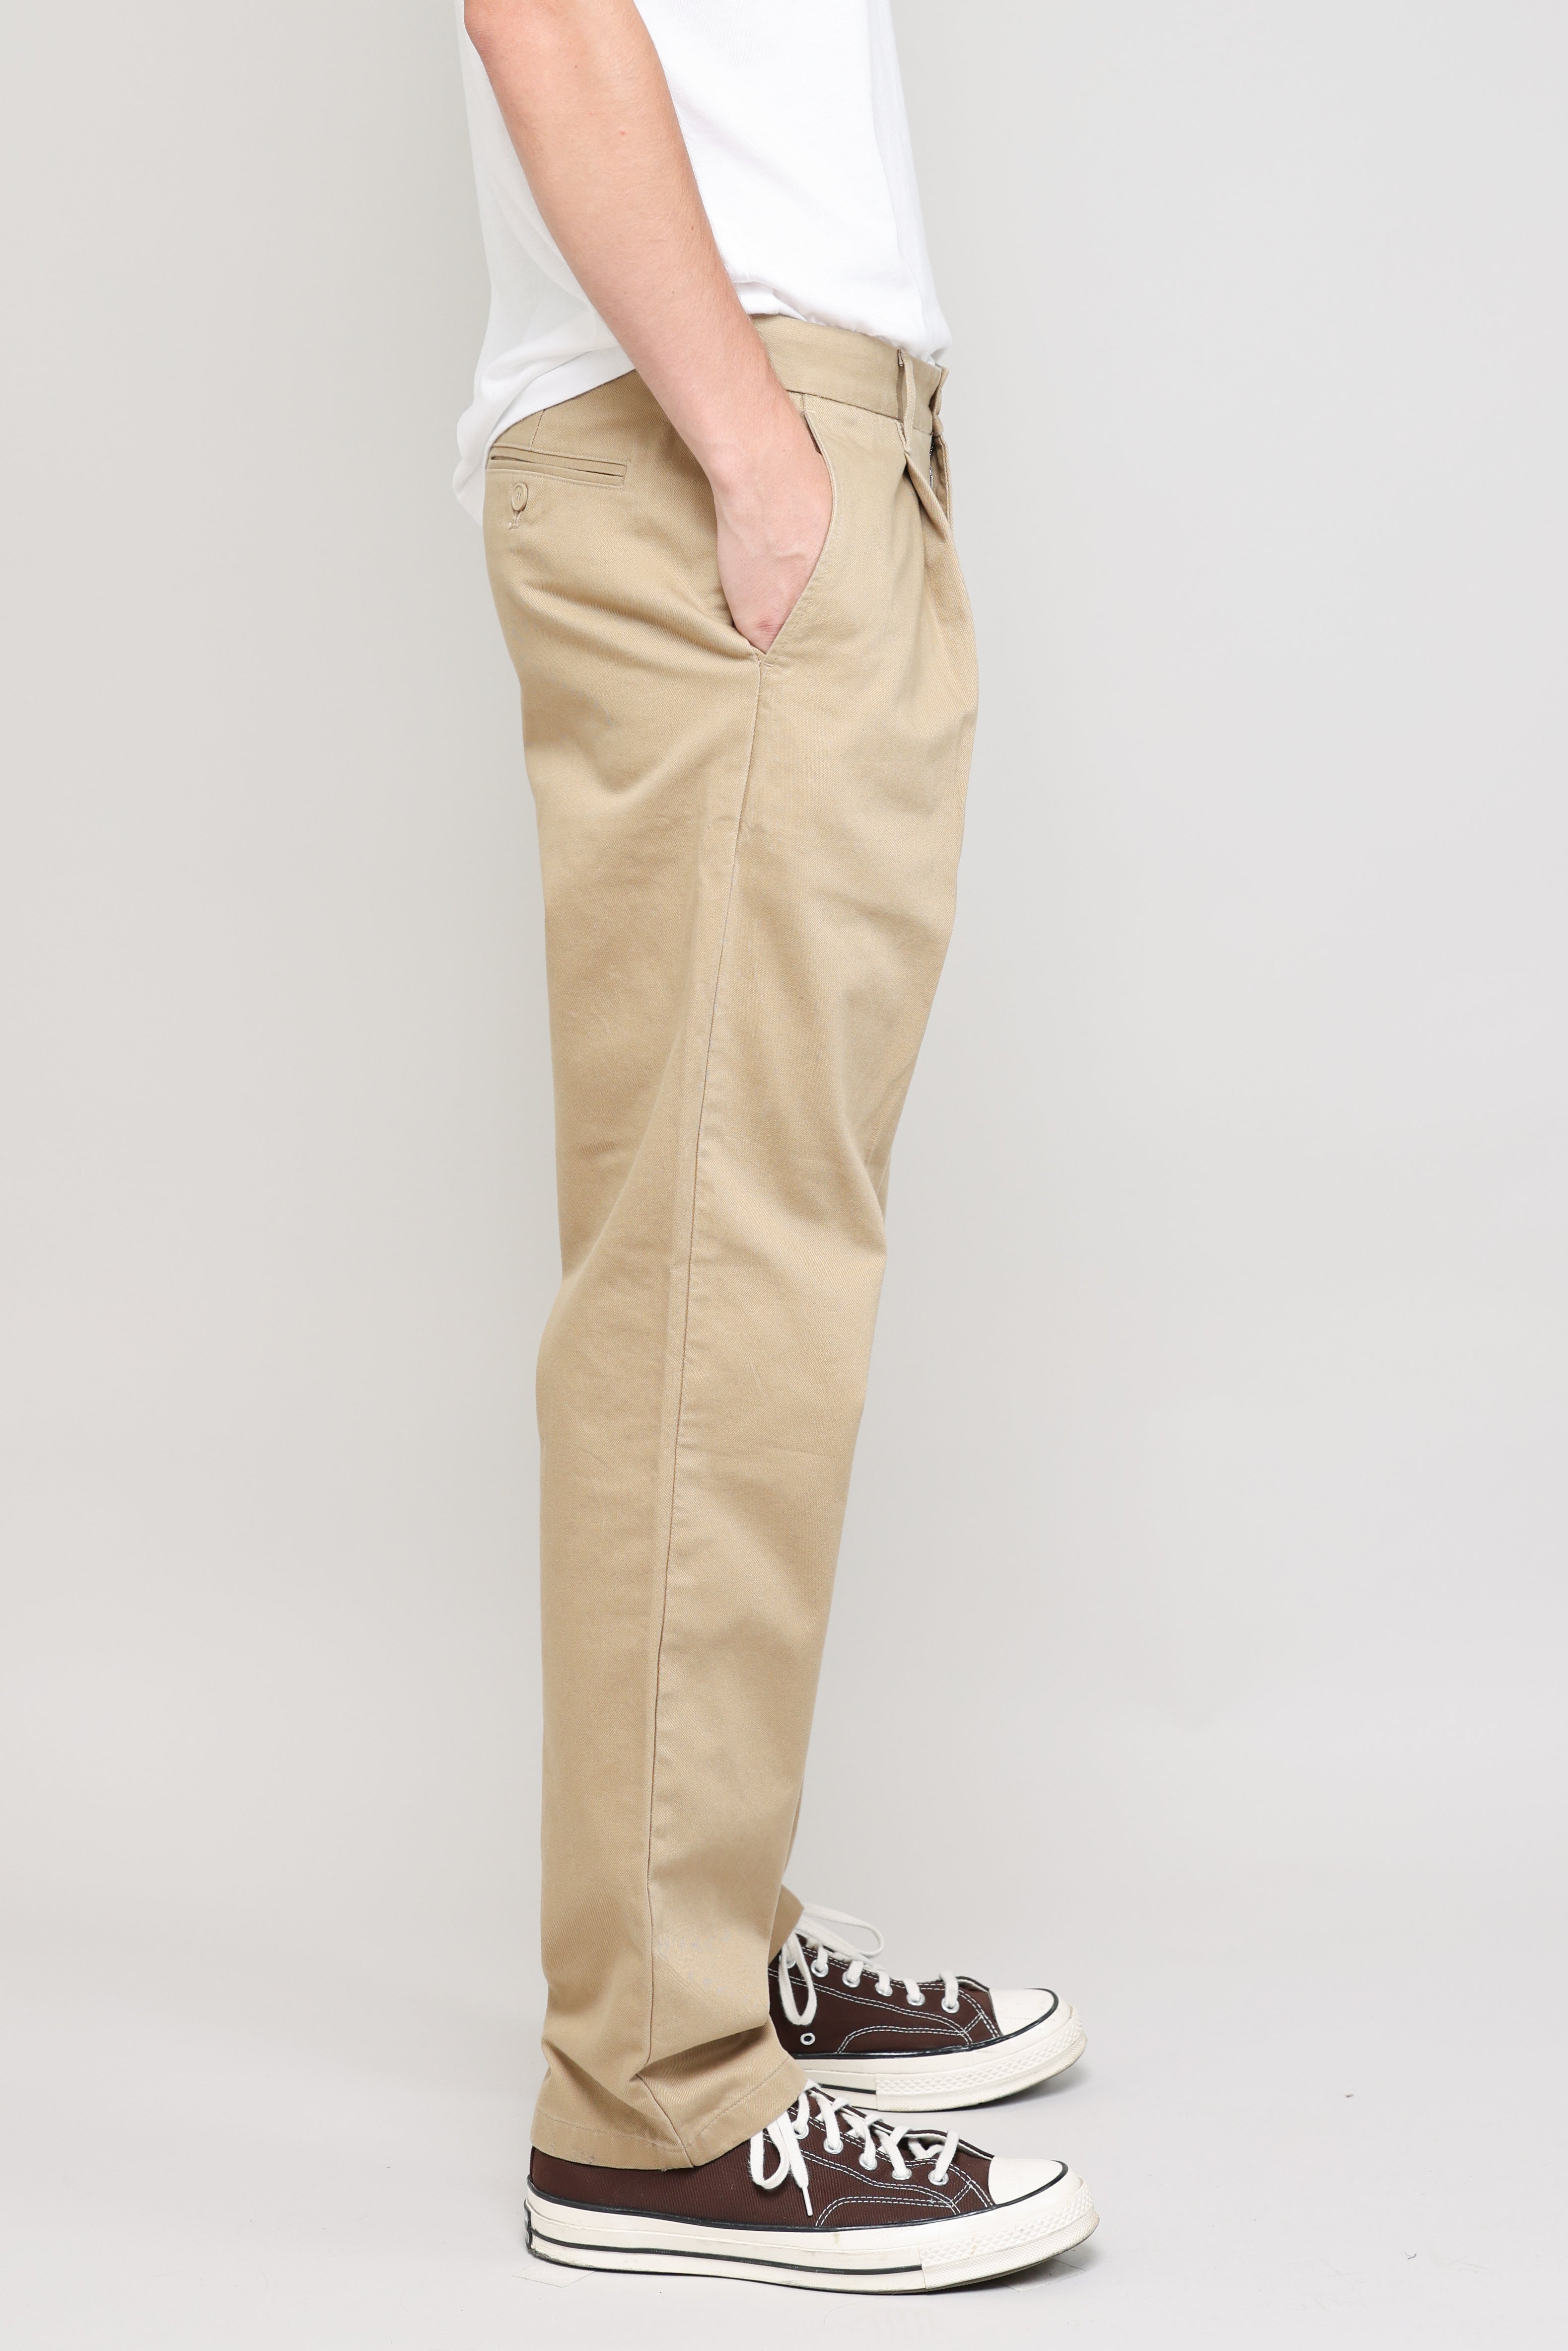 Pleated Chino Vintage French Drill in Khaki 06